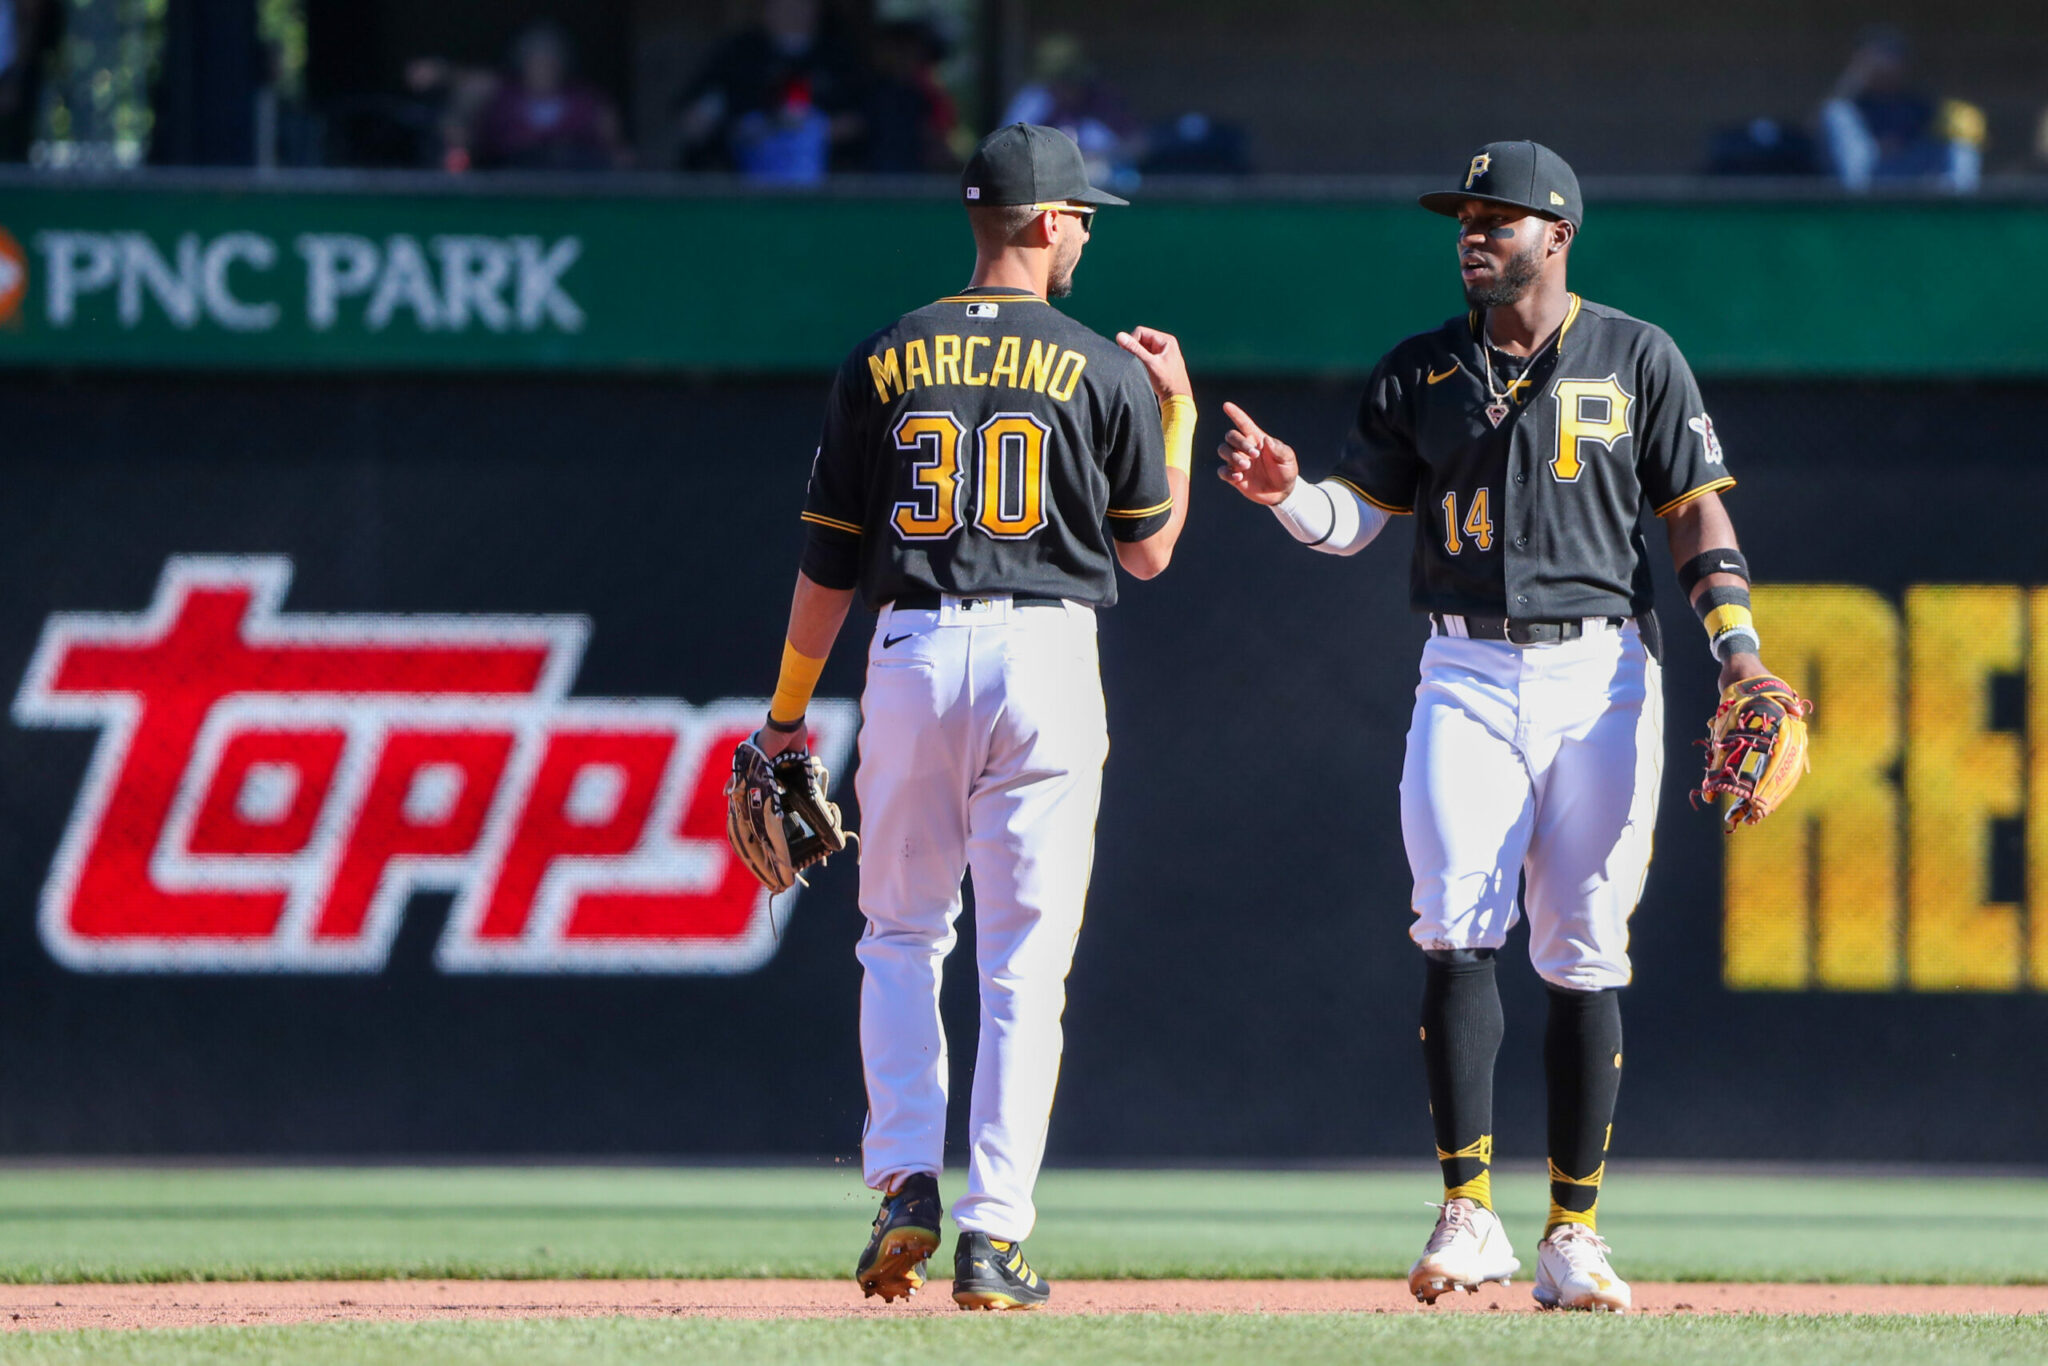 Pirates Roundtable: Which Spring Training Roster Battle Are You Watching?